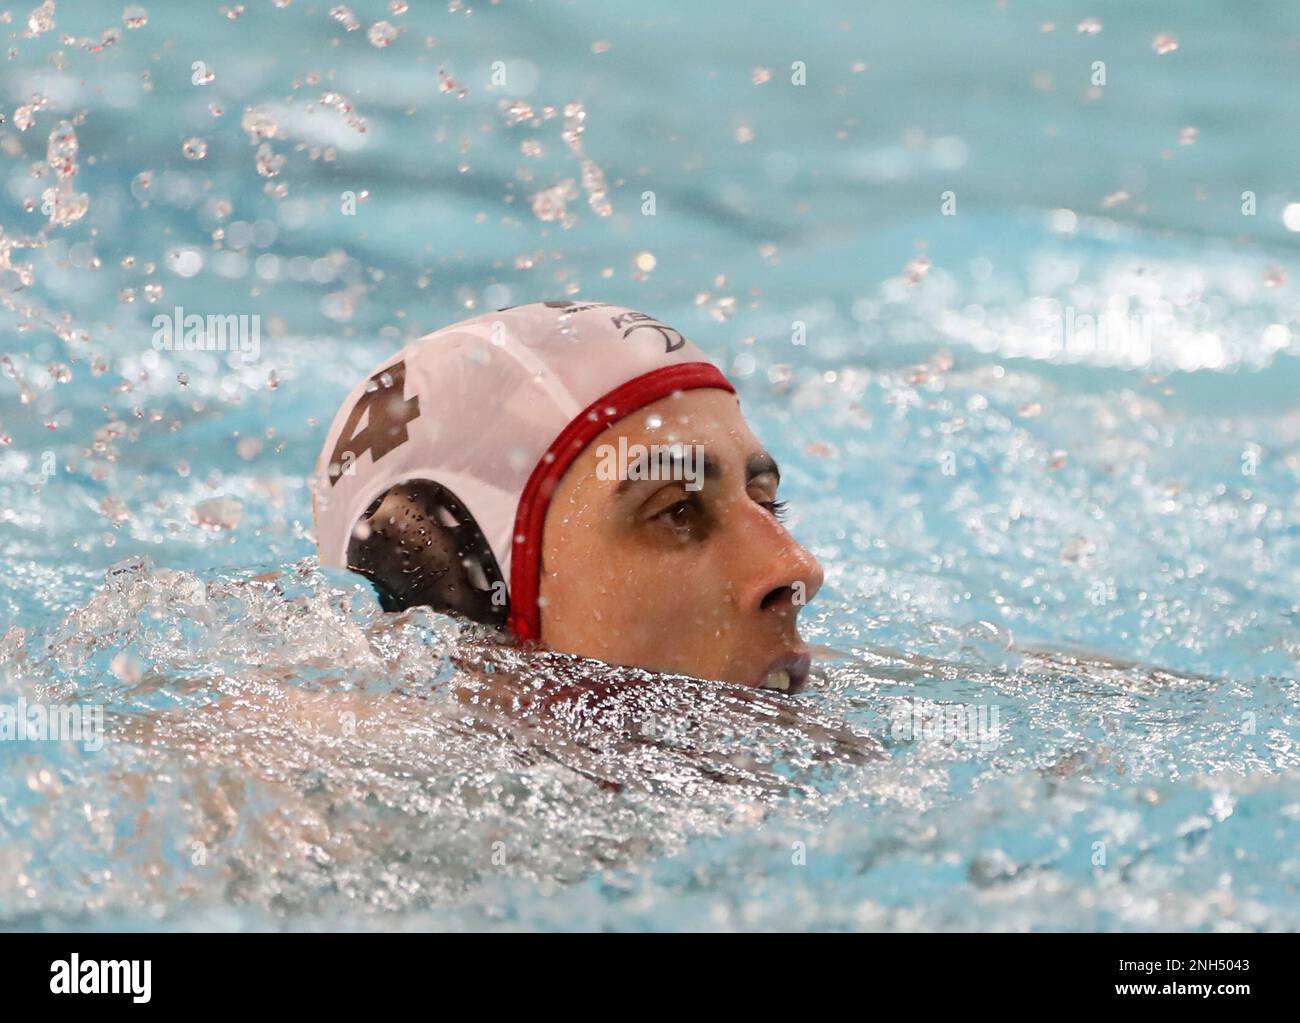 KRAGUJEVAC, SERBIA - FEBRUARY 18: during the LEN Men's Water Polo Champions  League match between VK Radnicki vs Olympiacos on February 18, 2023 in  Kragujevac, Serbia. (Photo by Nikola Krstic/MB Media/Getty Images